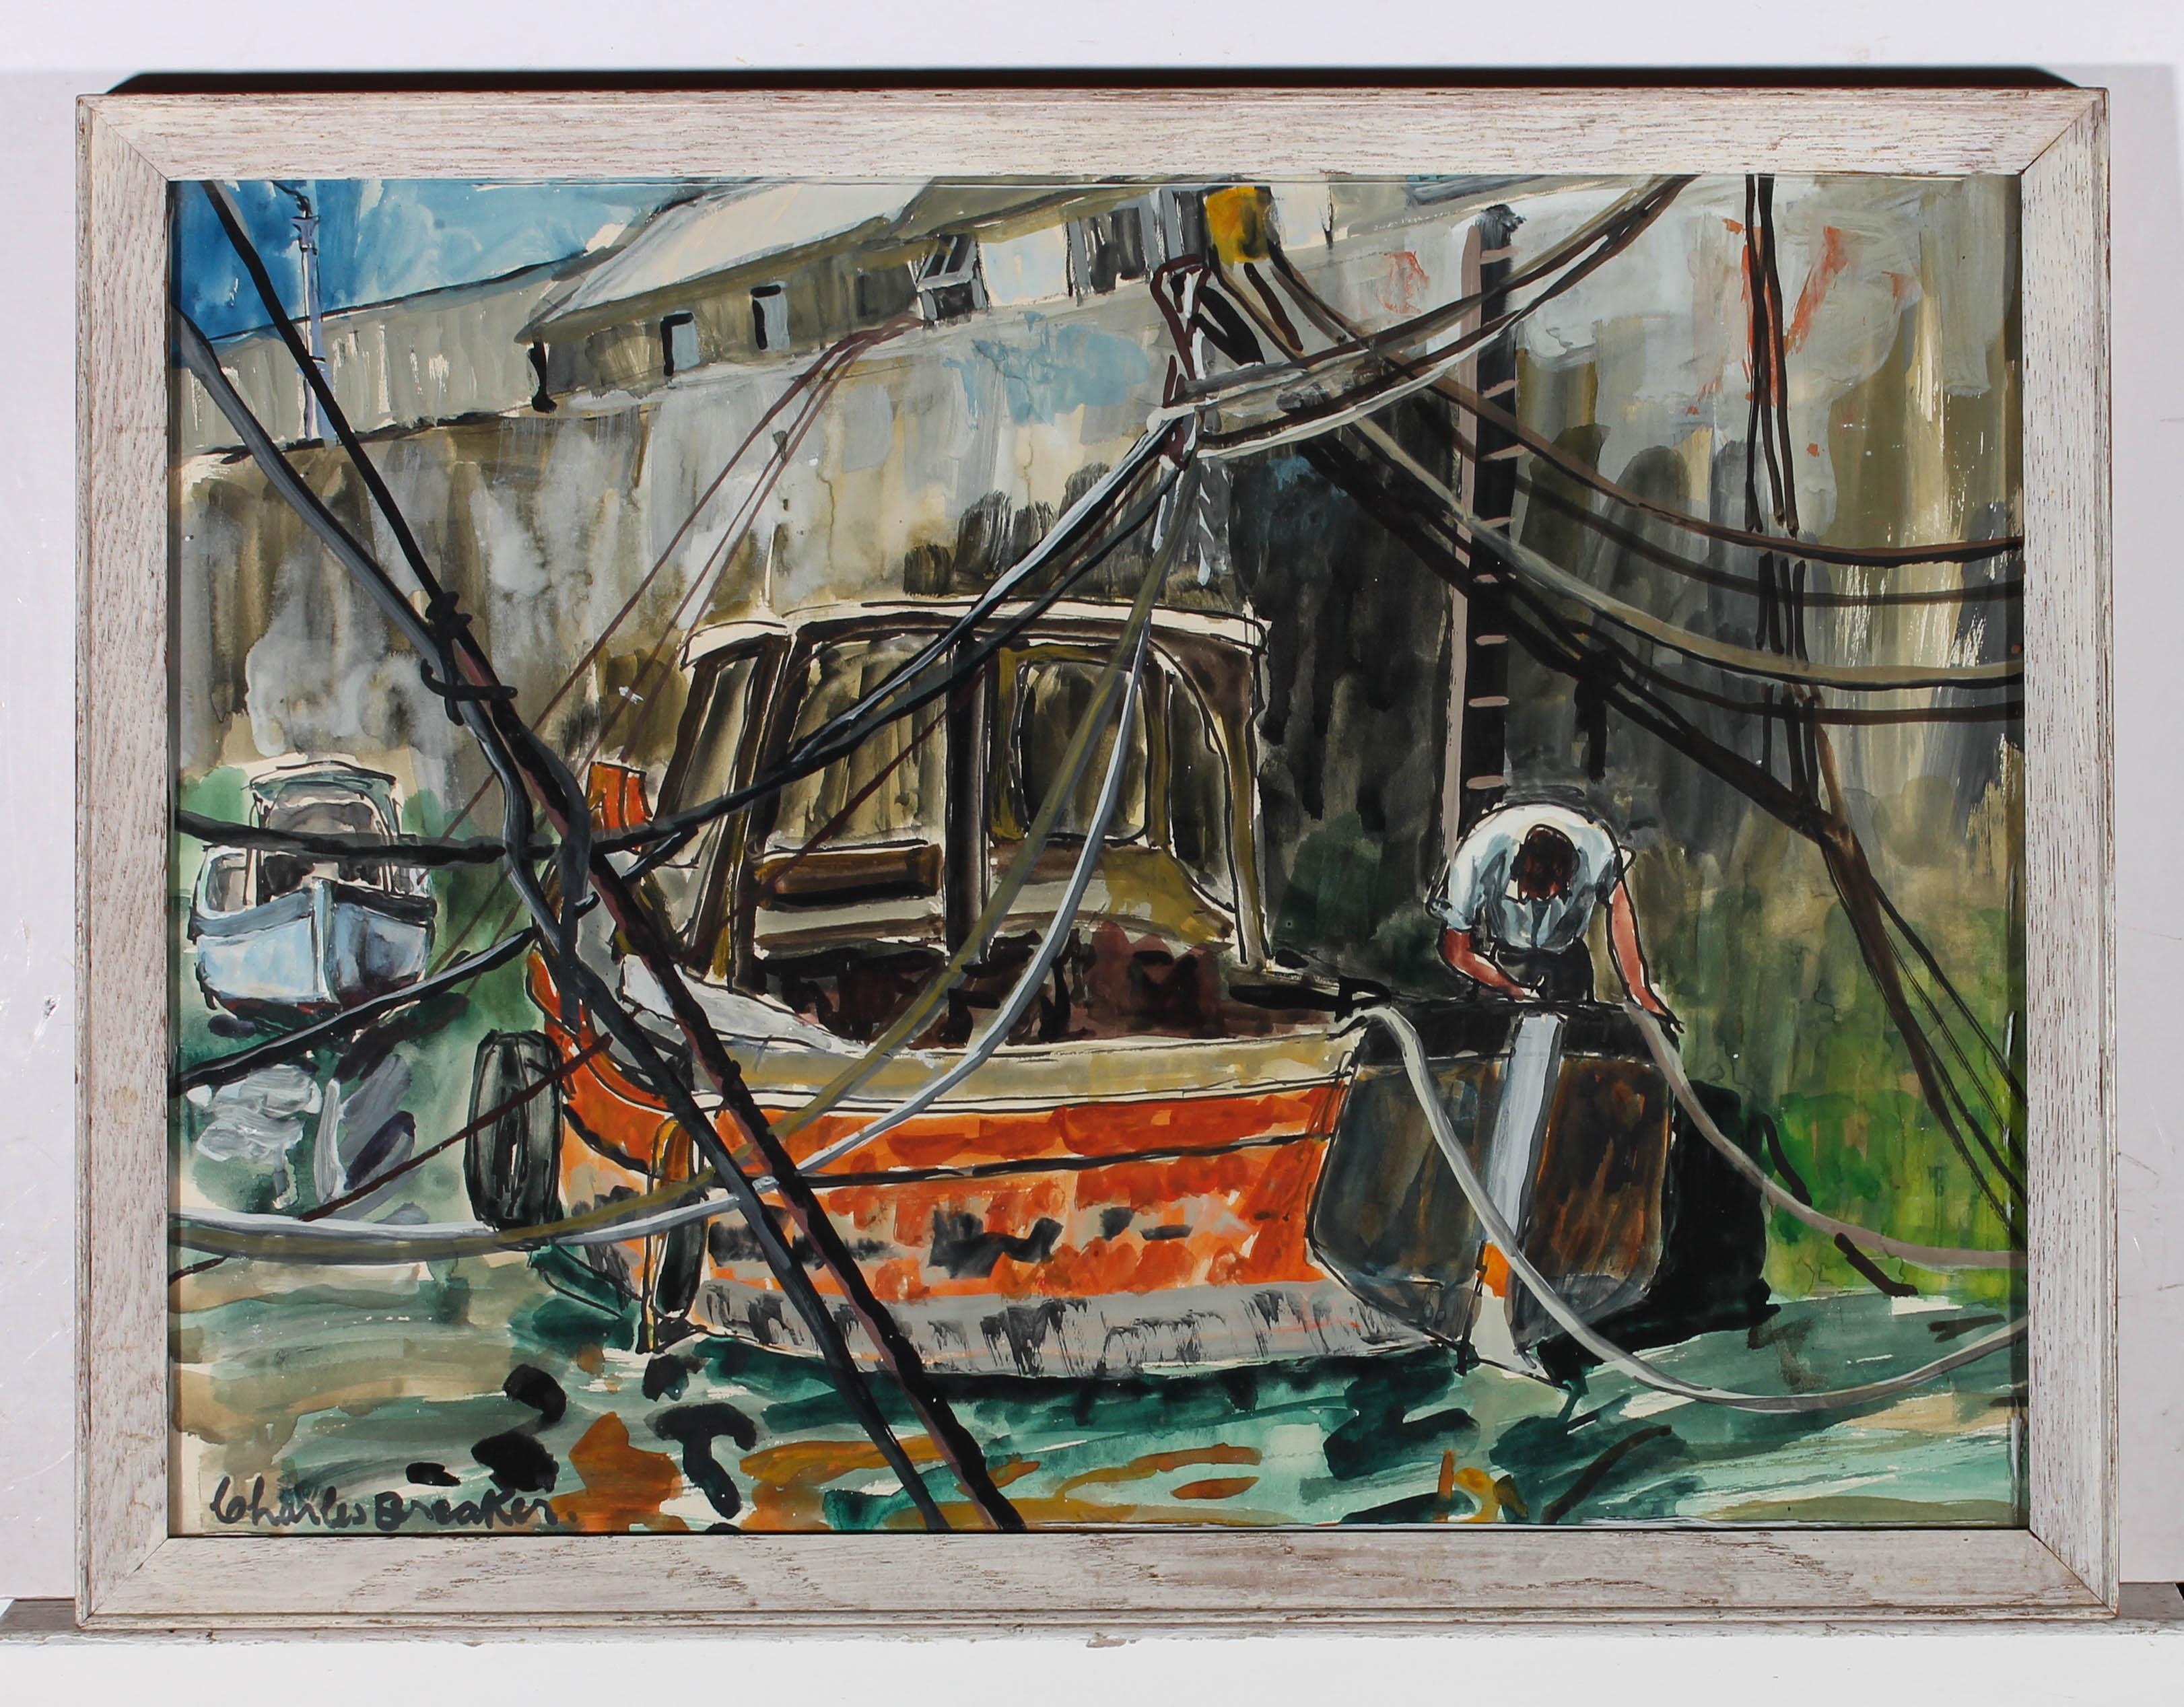 A colourful and energetic acrylic painting of a bright orange fisherman's boat, captured from the water. The owner can be seen on board, giving the boat a good once over before taking it out to sea. The orange boat commands your attention in the